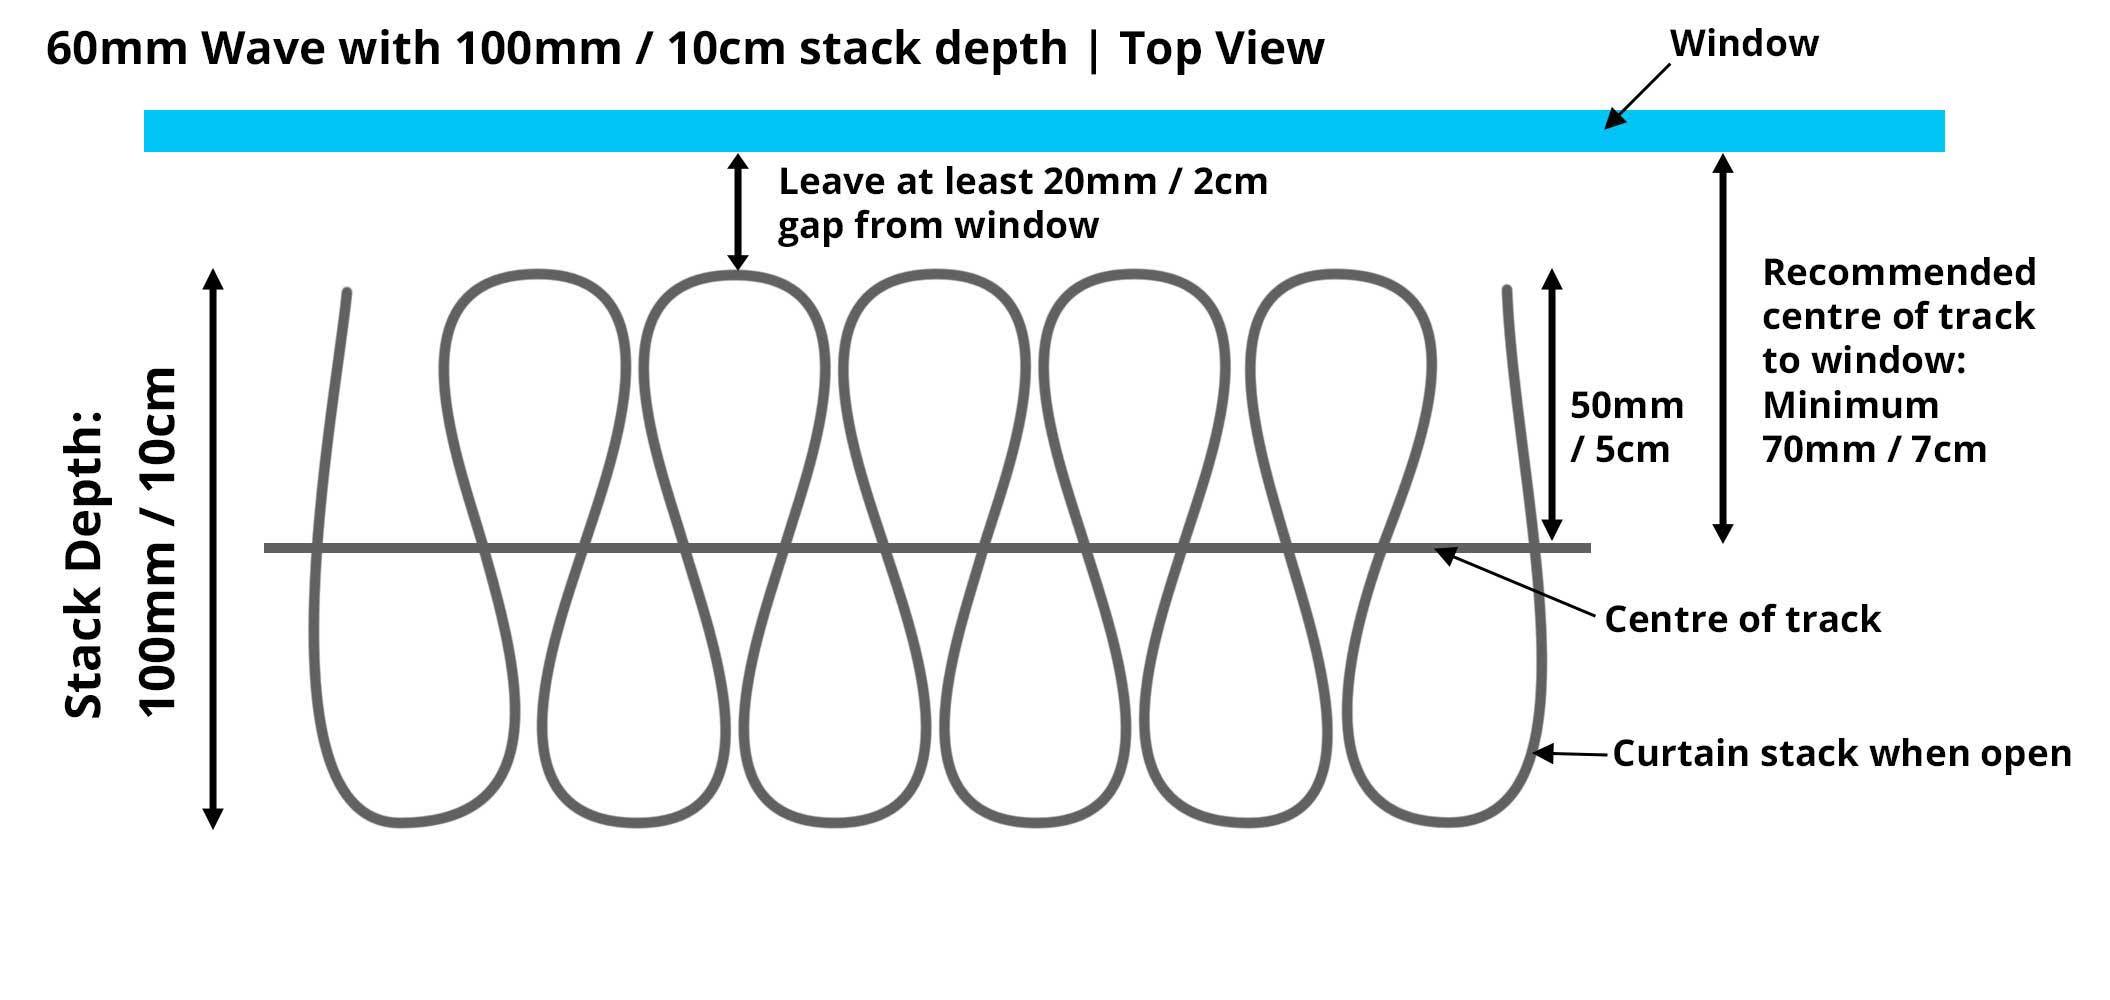 An image explaining the 100mm stack depth on a 60mm Wave curtain